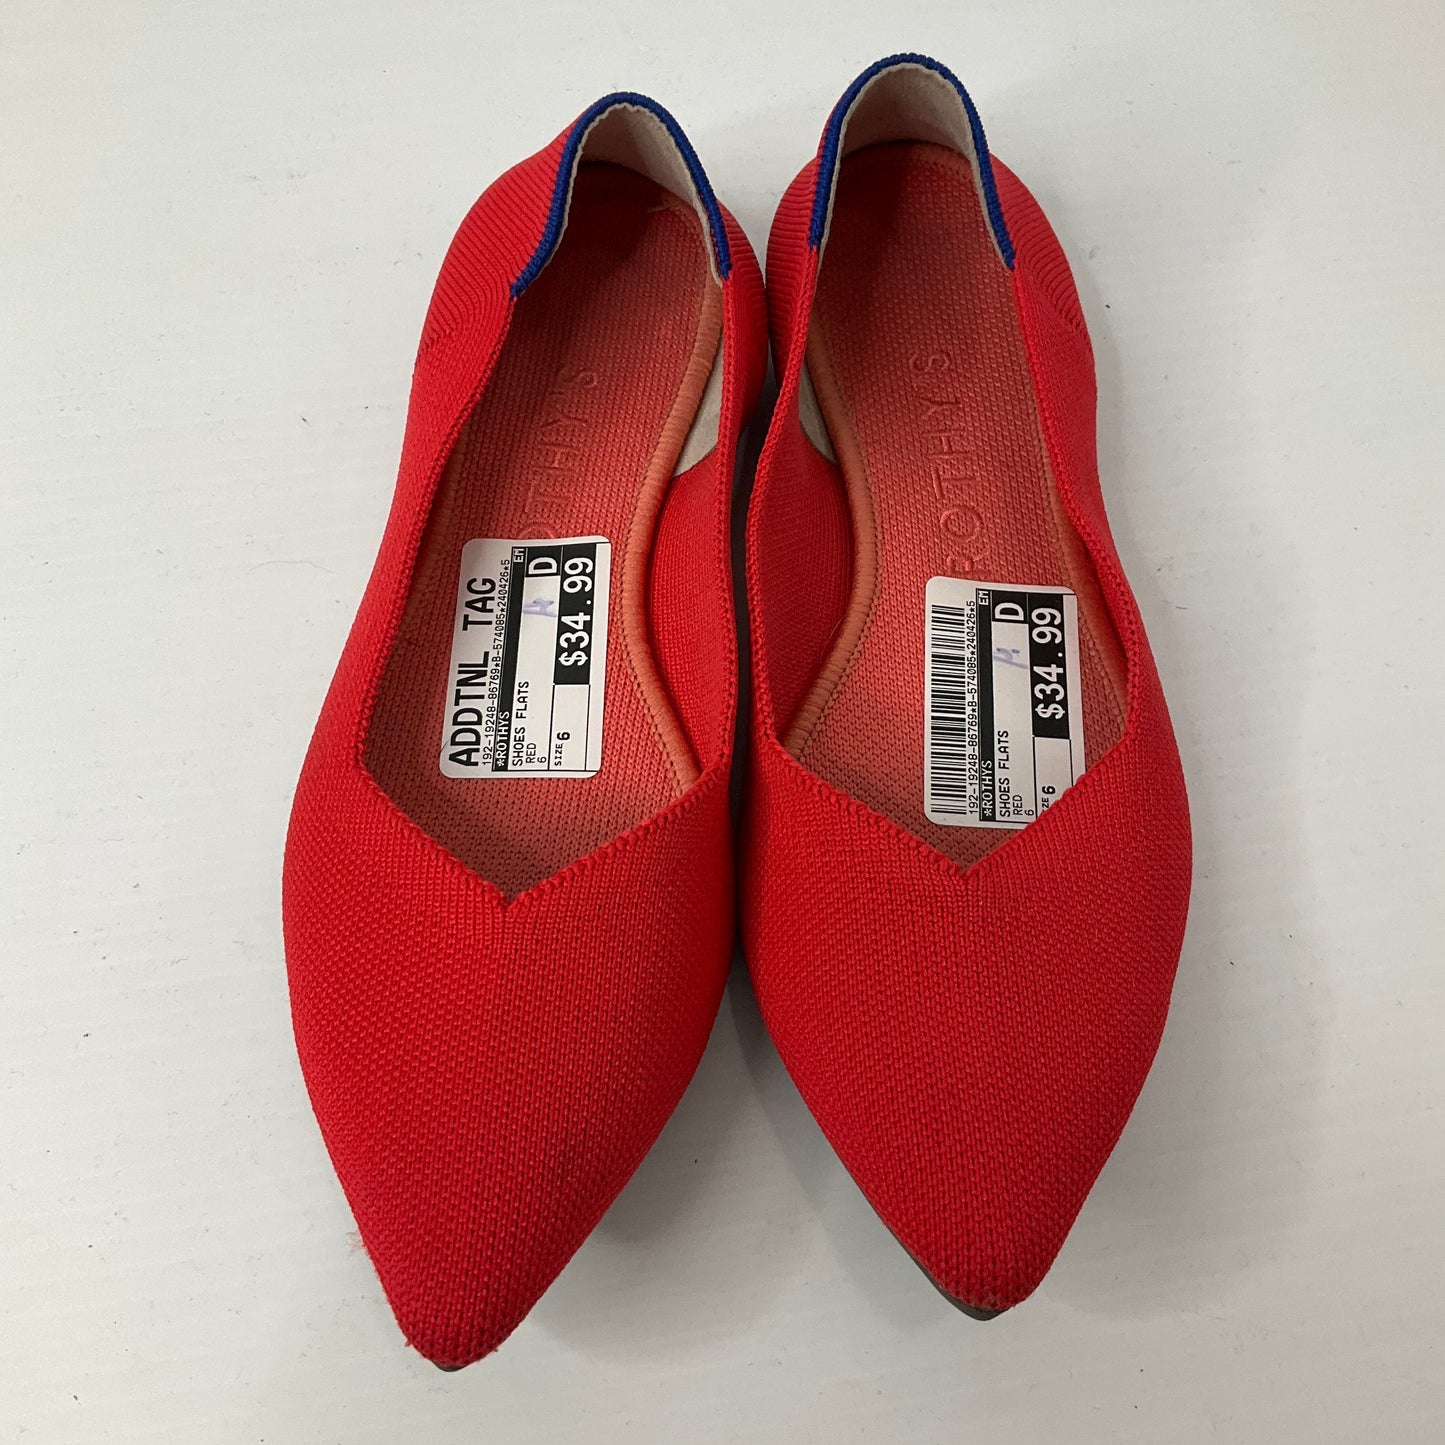 Red Shoes Flats Rothys, Size 6